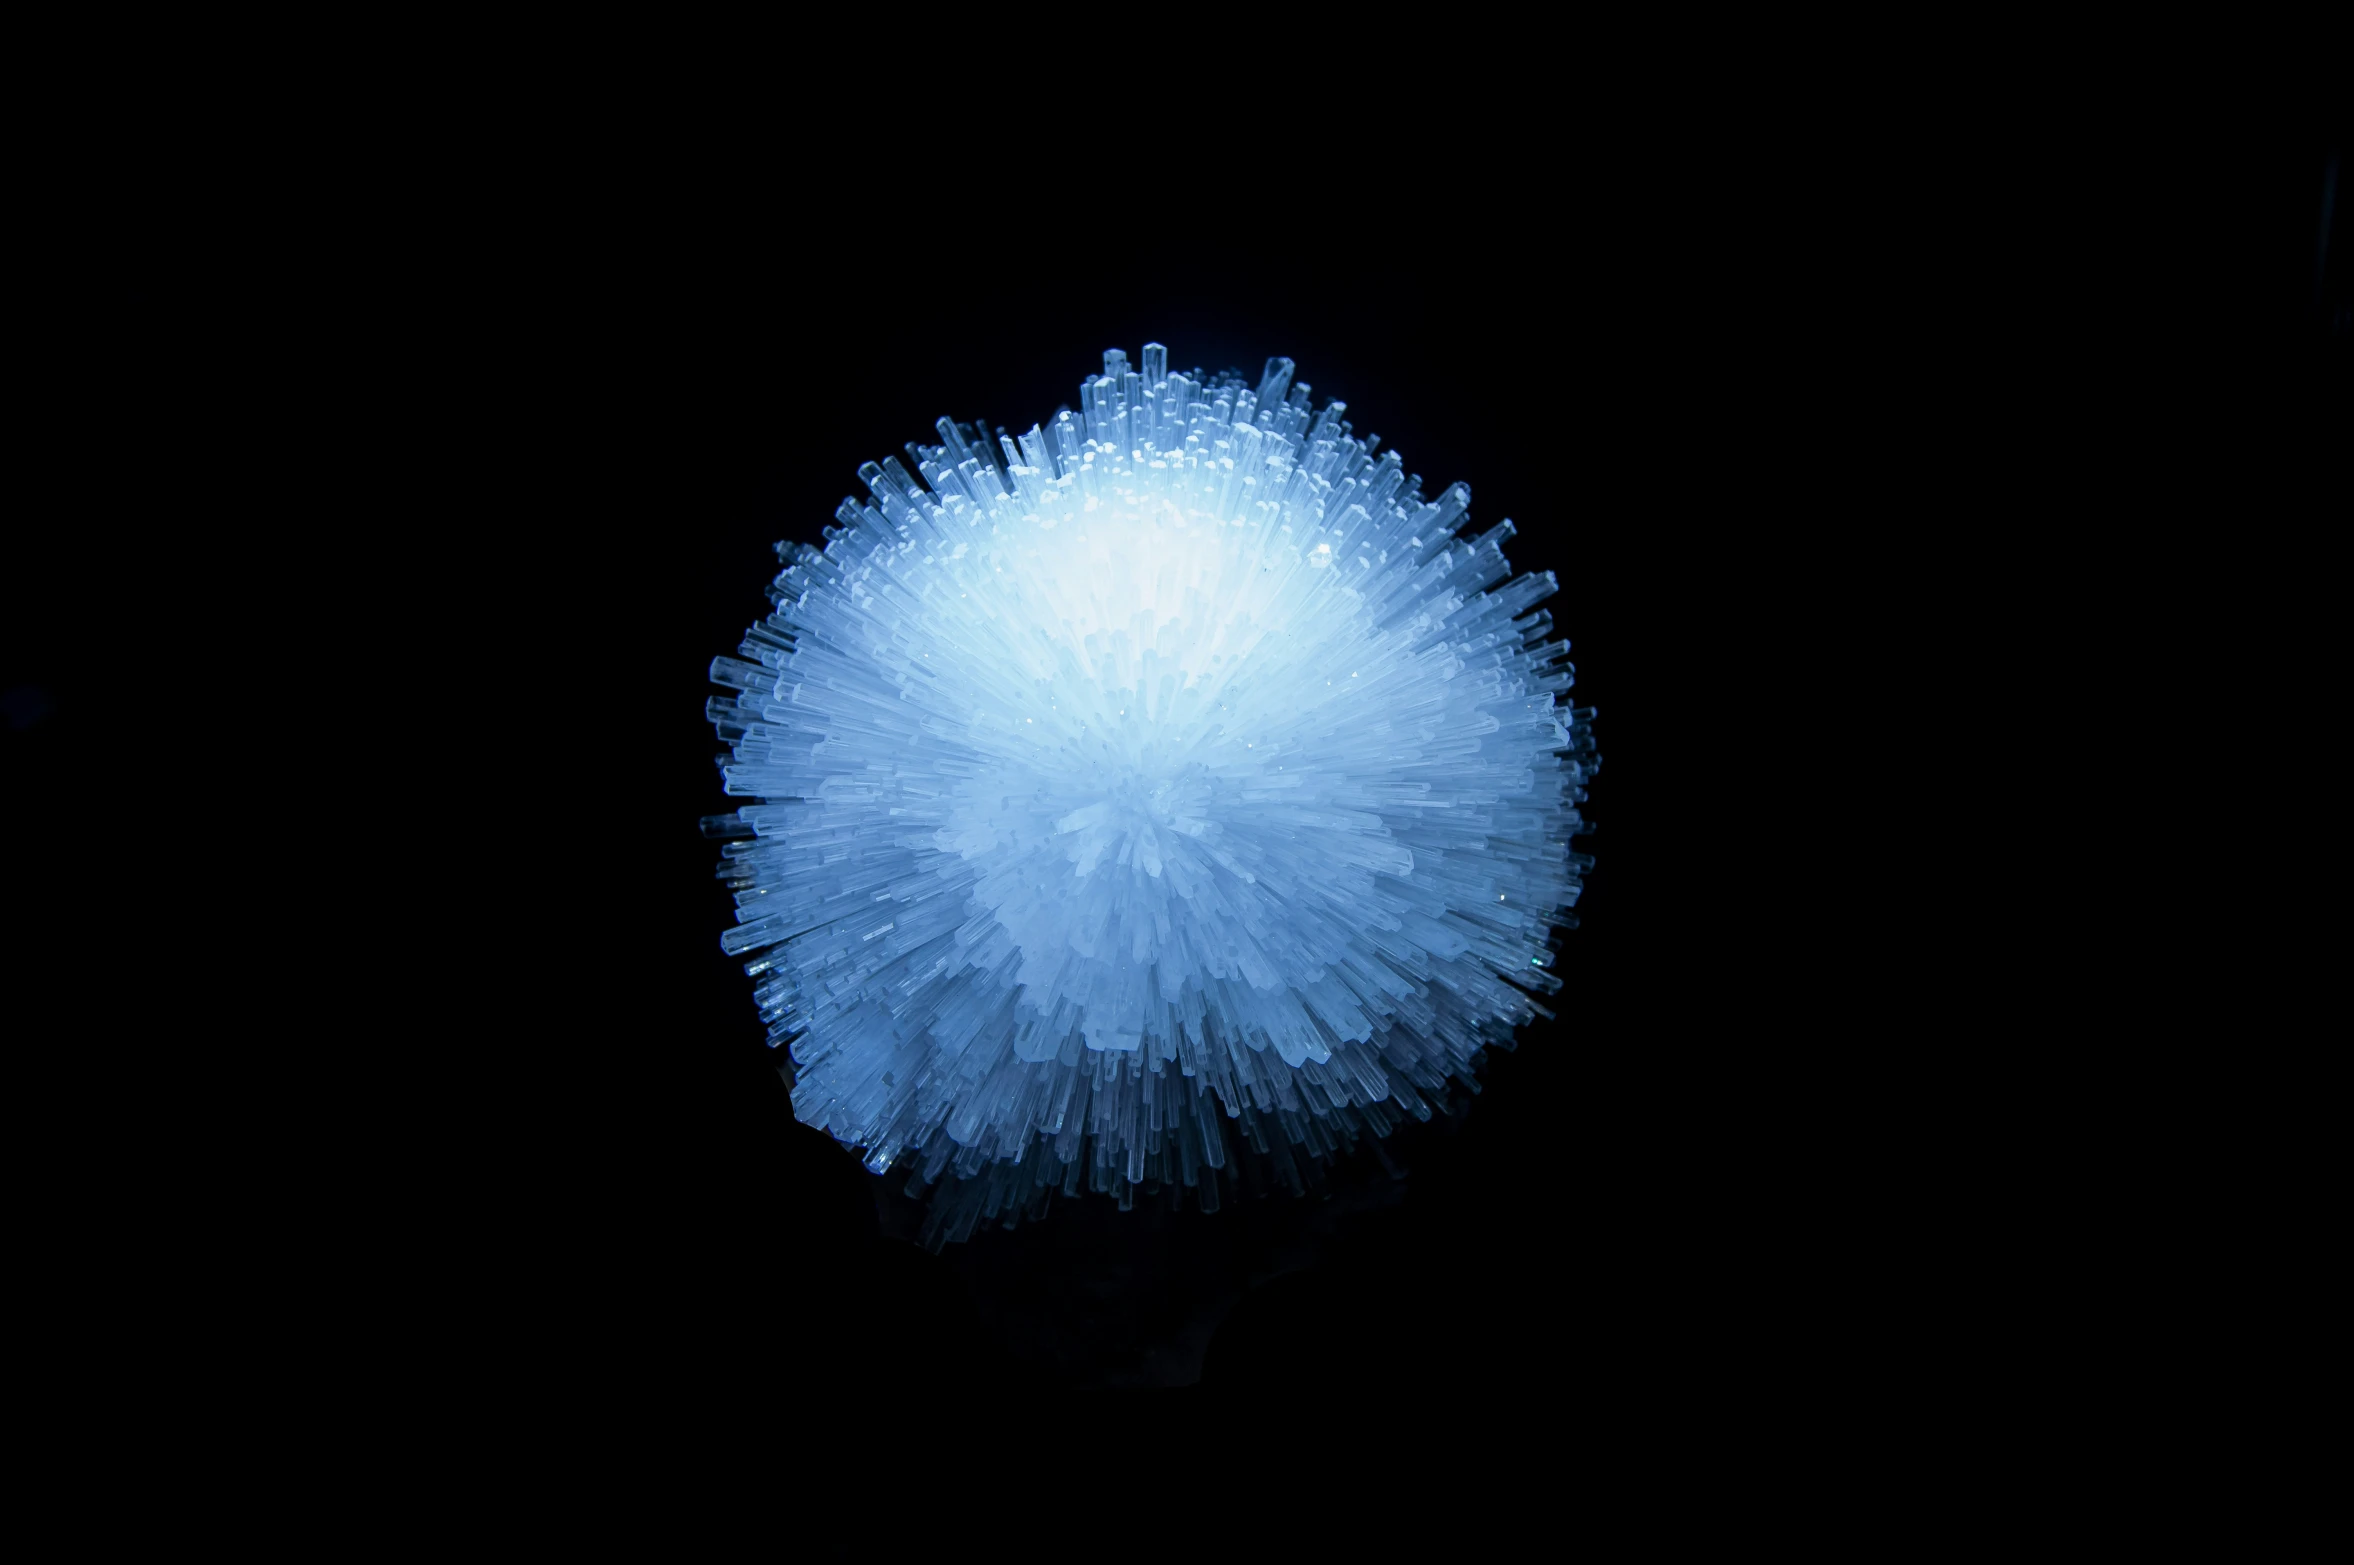 a large blue dandelion is shining on a black background